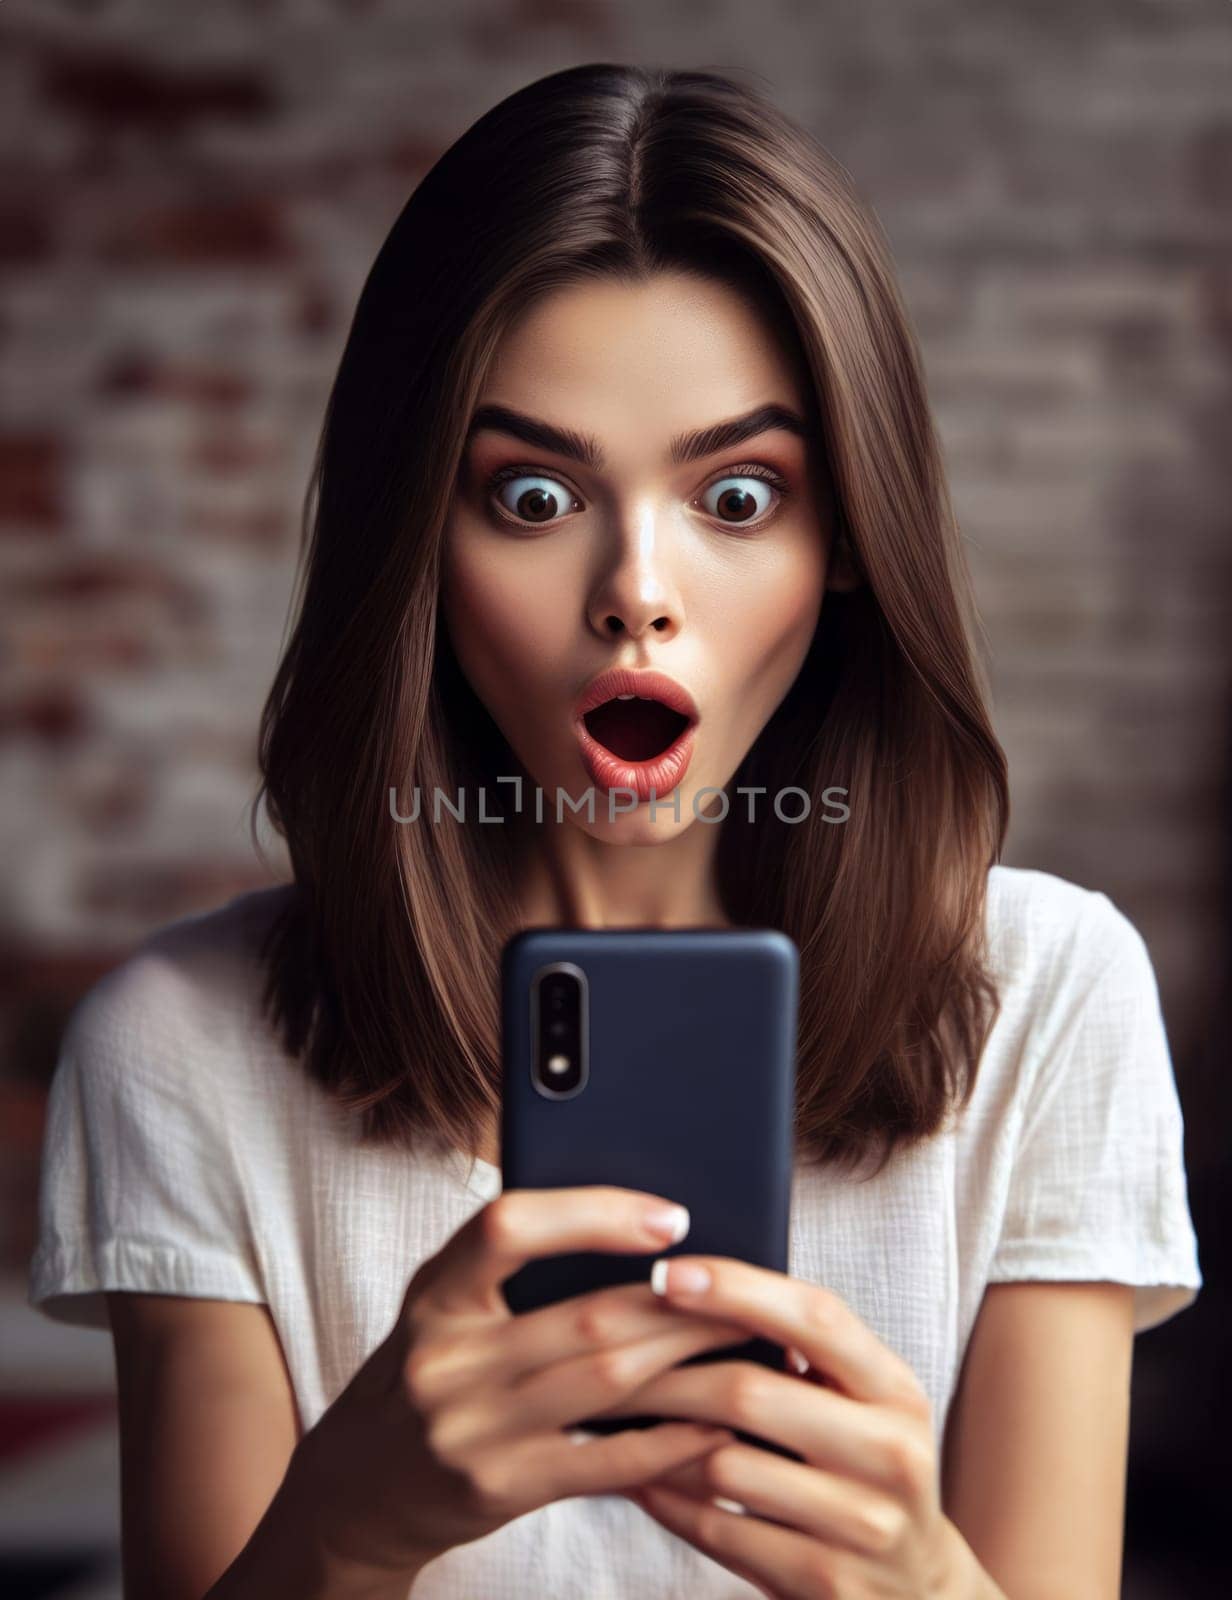 A young surprised woman with long brown hair is holding a smartphone in her hand. She is wearing a white t-shirt and standing in front of a brick wall. by sfinks